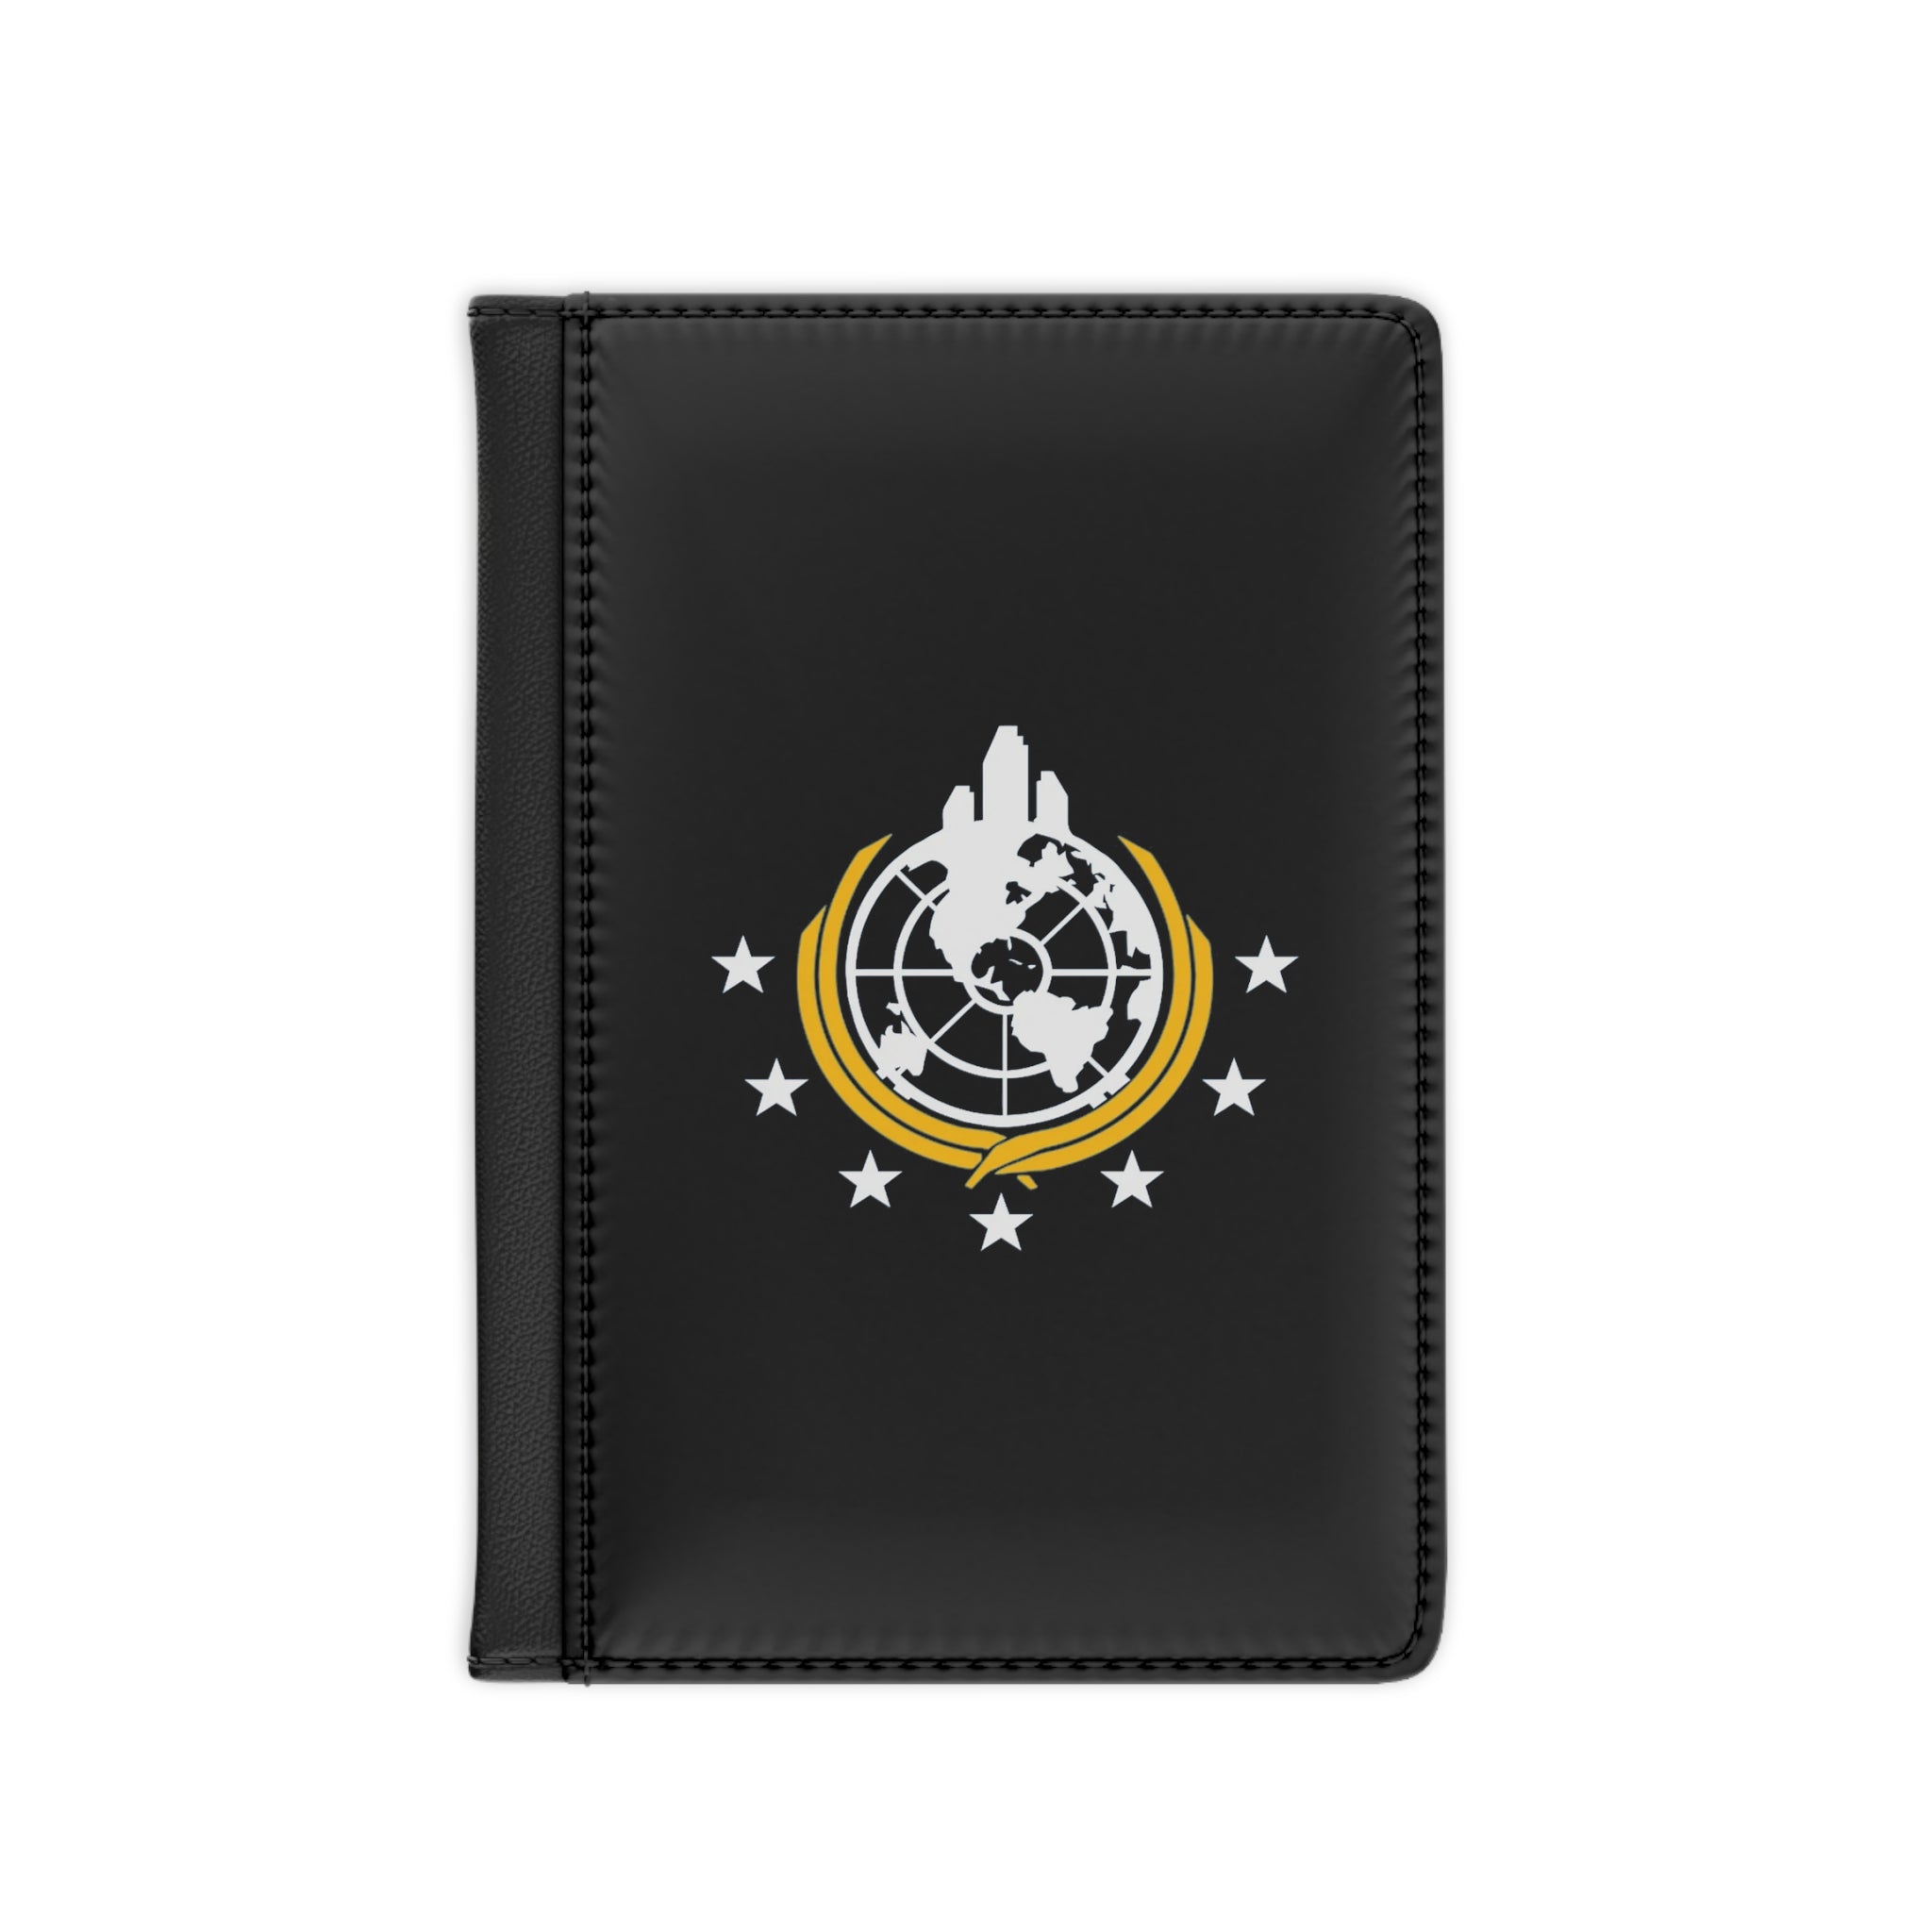 Helldivers 2 Super Earth Passport Cover | Cool Looking Universal Passport Holder Gift Gifts For Him Her Black Liberty Democracy Birthday Christmas Valentine's